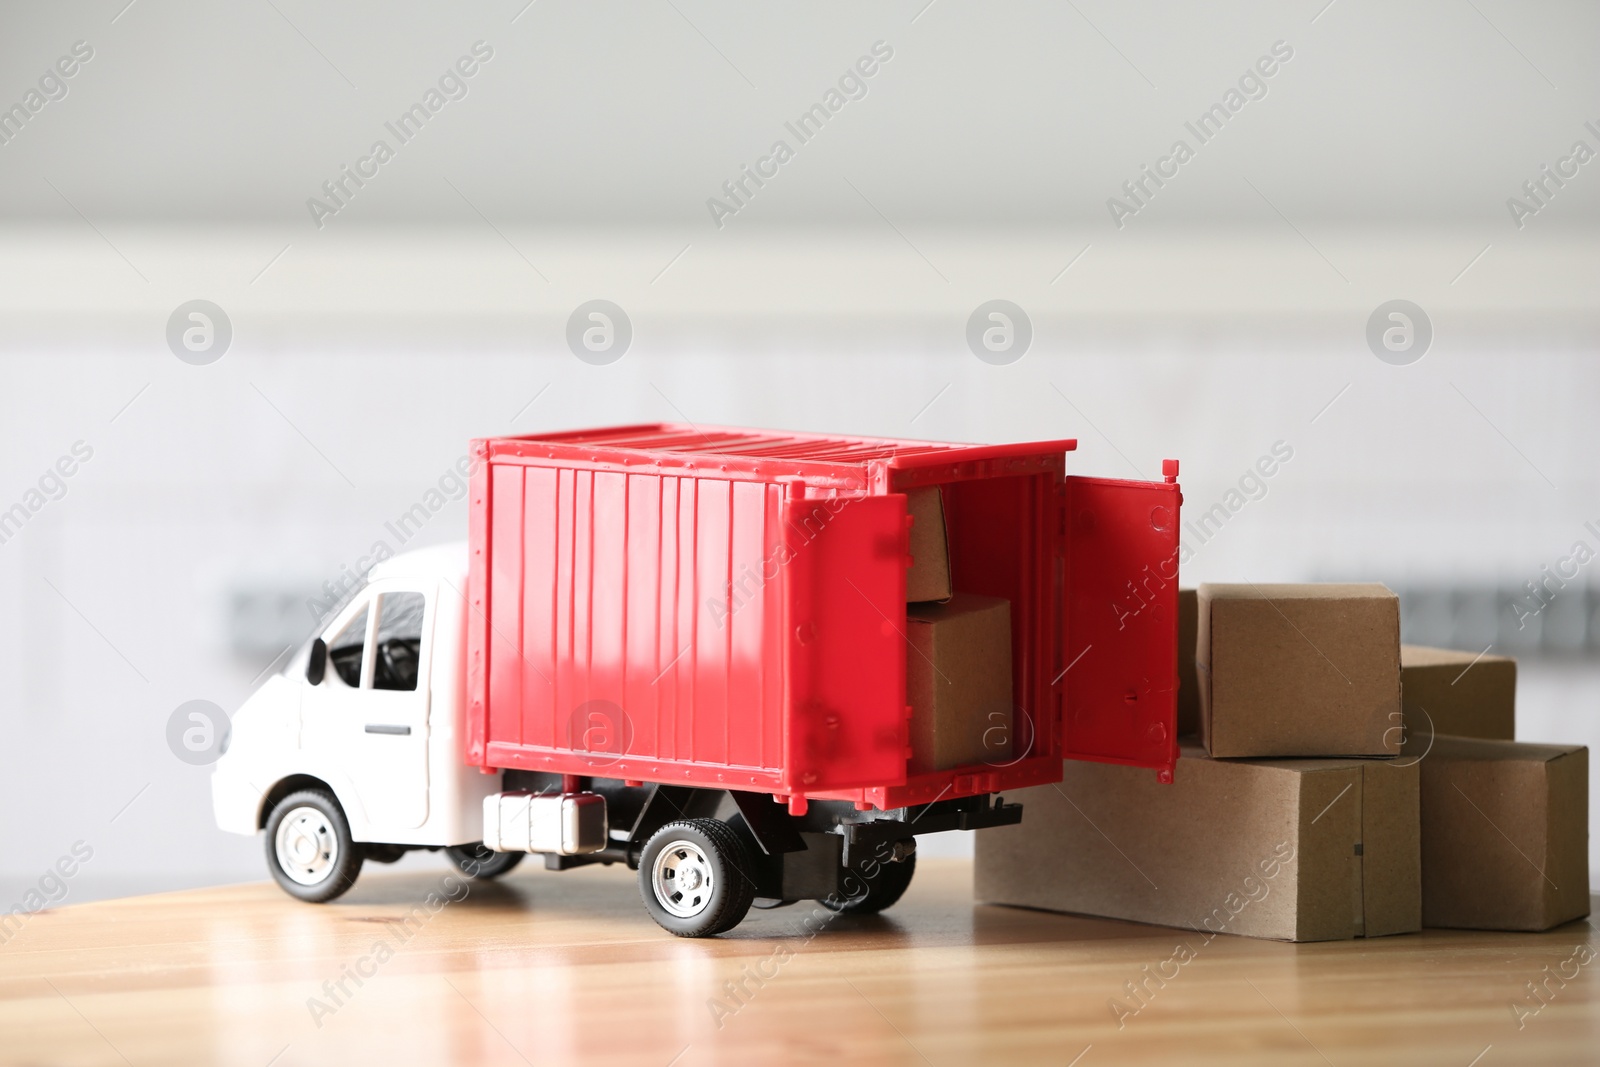 Photo of Toy truck and cardboard boxes on table against blurred background. Courier service